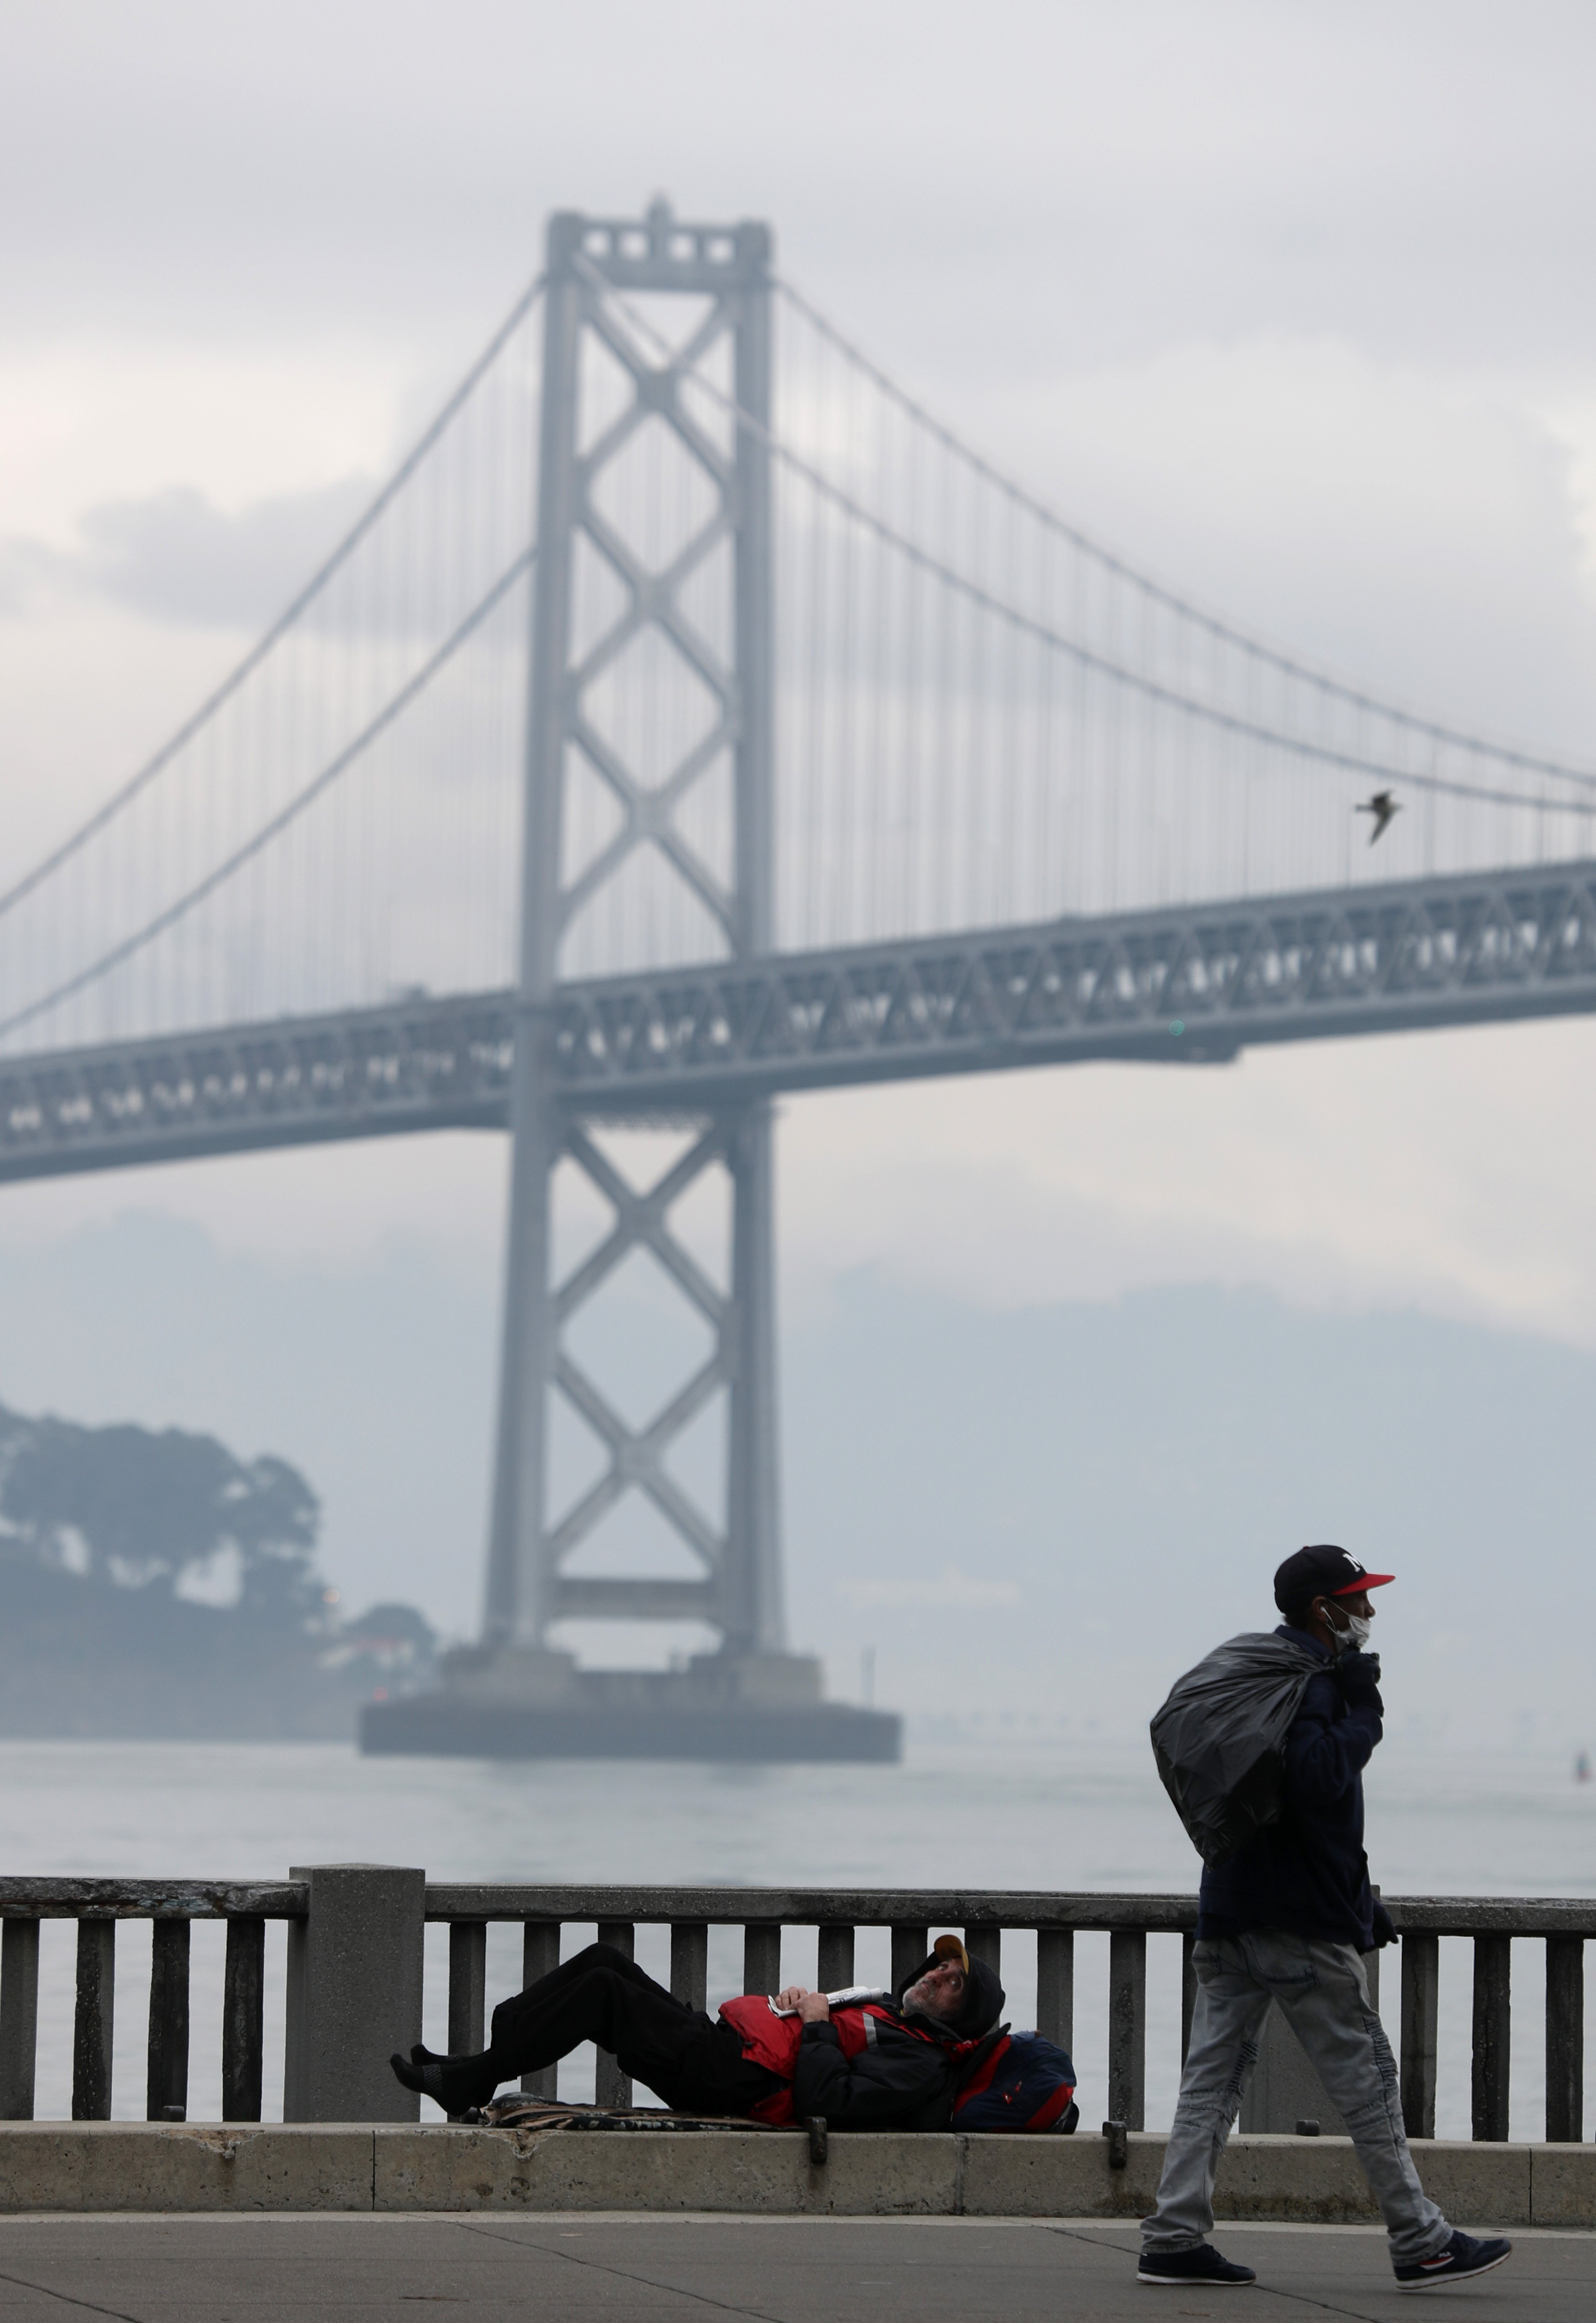 A homeless man lays on the sidewalk near the San Francisco–Oakland Bay Bridge on December 05, 2019 in San Francisco, California. (Photo by Justin Sullivan/Getty Images)